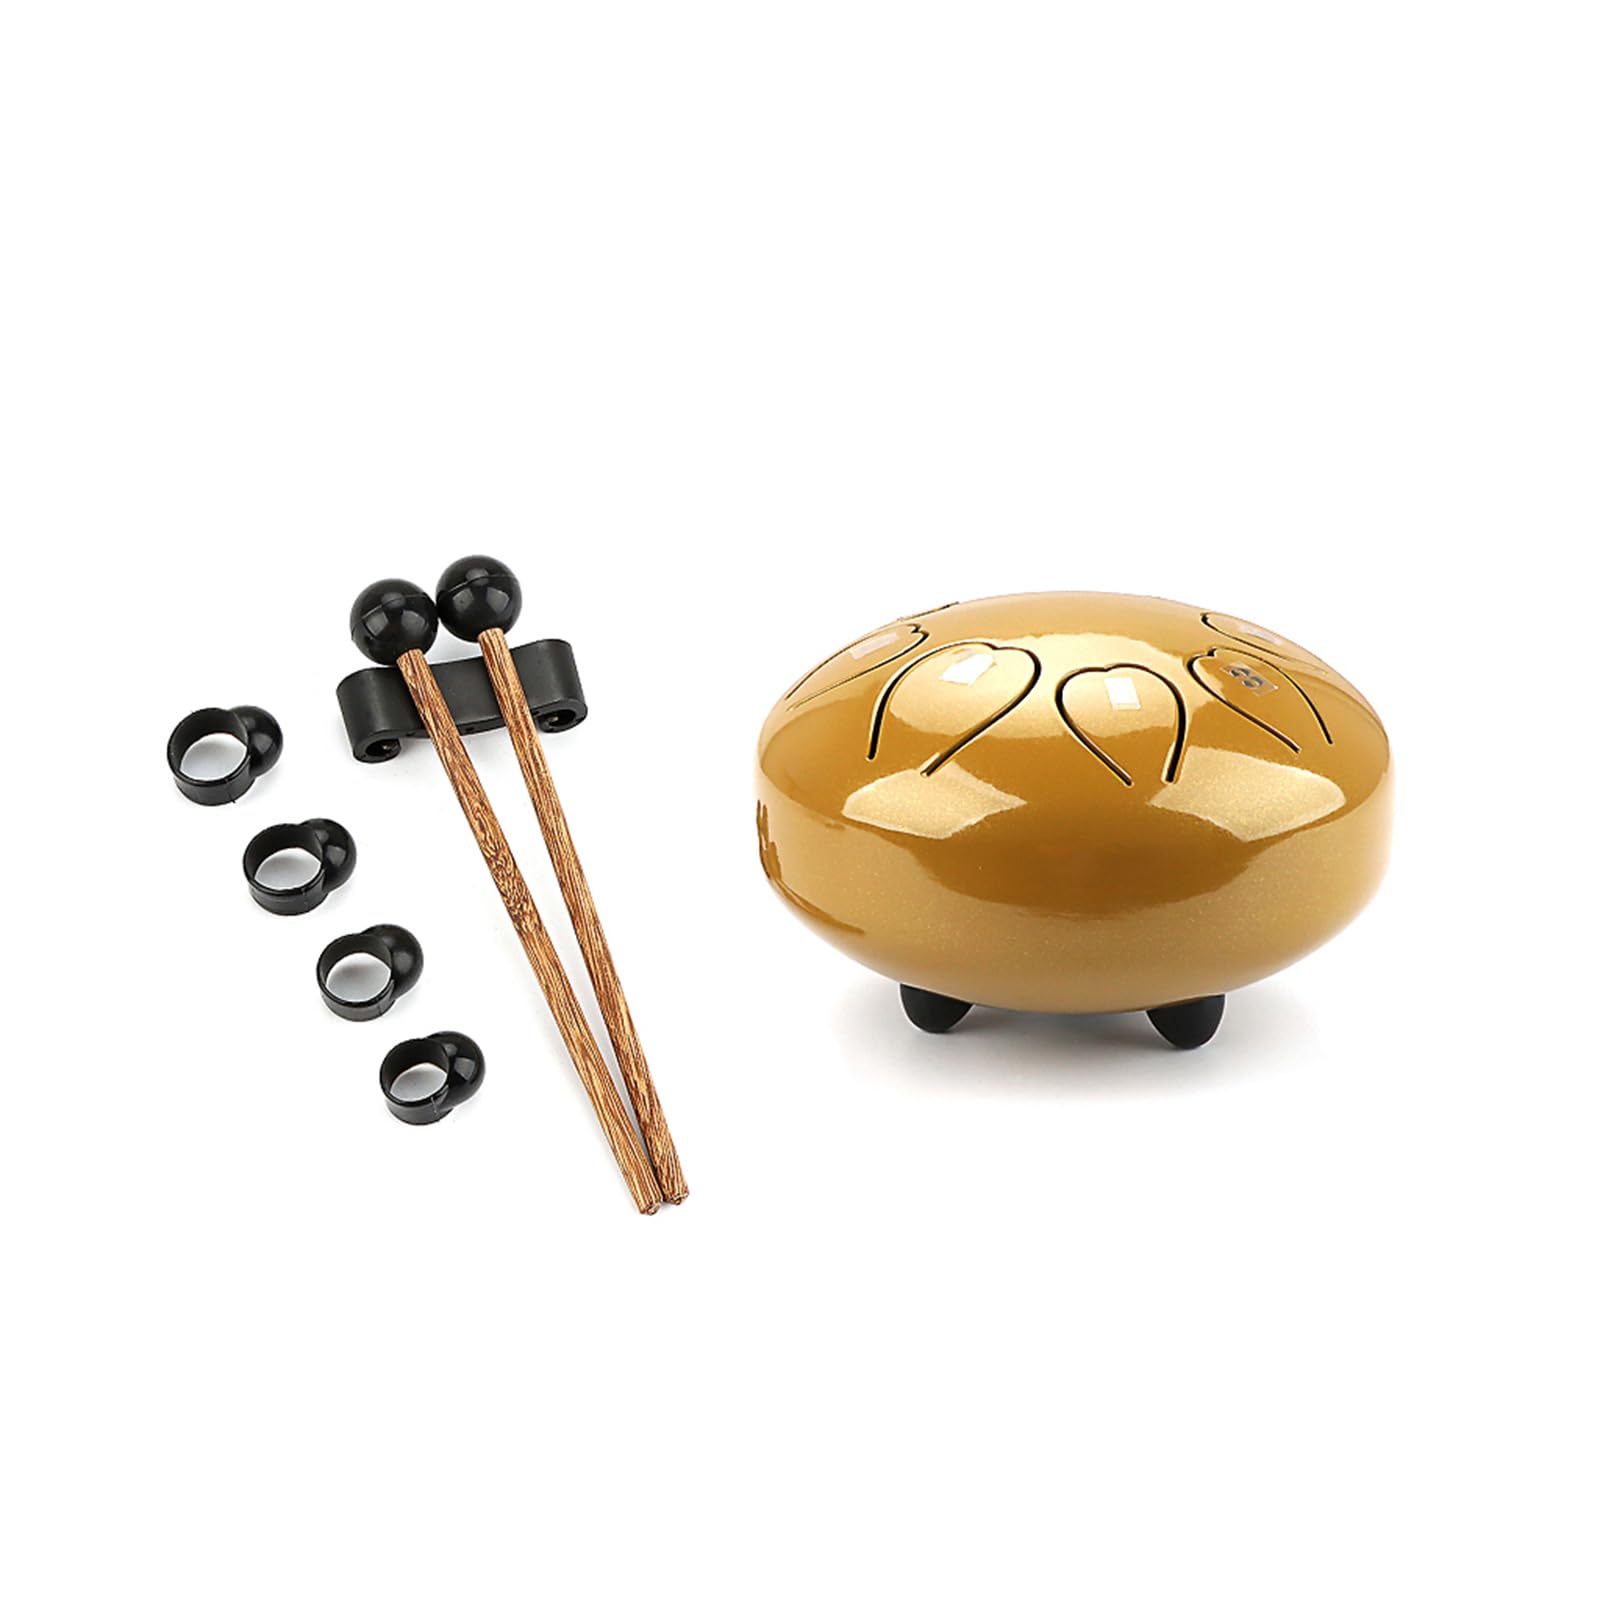 Steel Tongue Drum-8 Note 6 Inch Percussion Instrument Hand Pan Drum With Drum Mallets Carry Bag Music Book Gift Hand Pan Drum